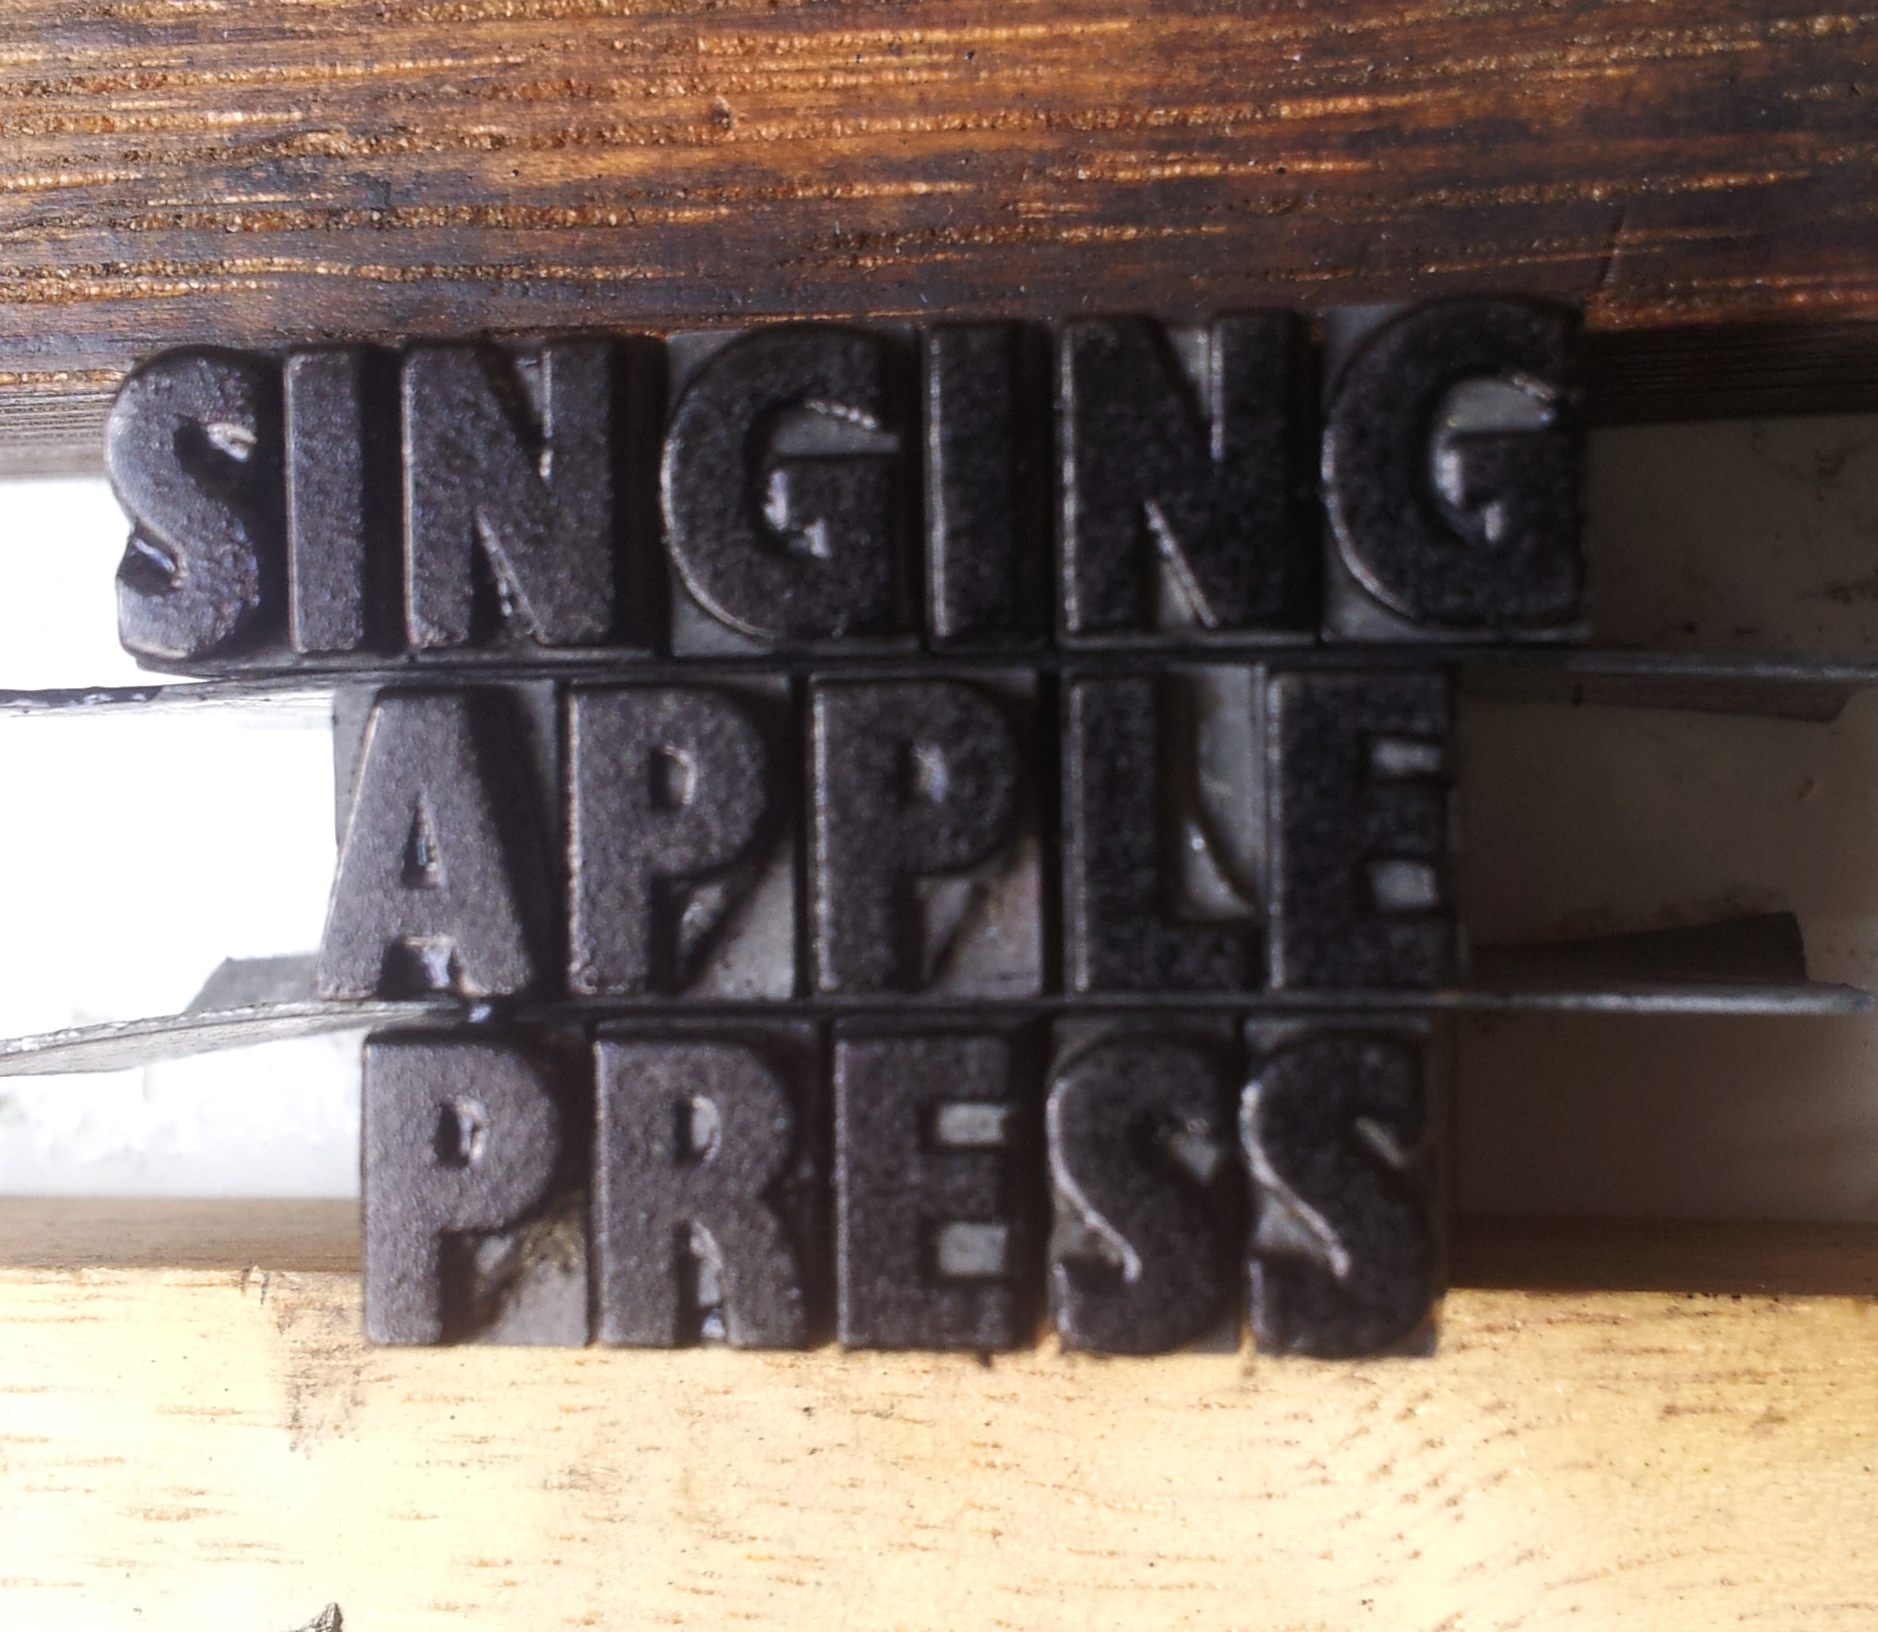  Image by Singing Apple Press 